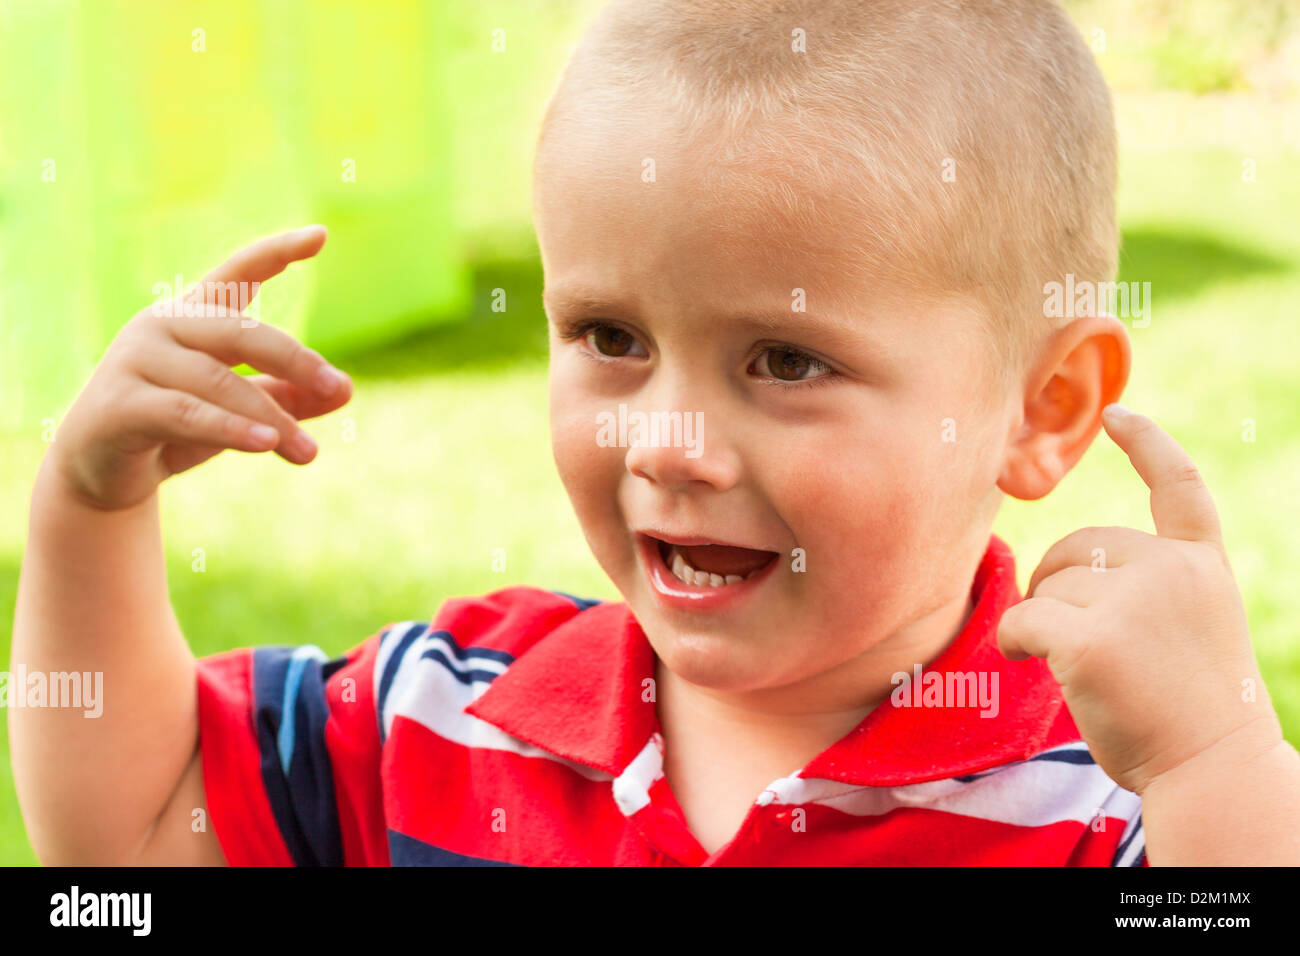 Close up of loud child boy shouting and gesturing. Stock Photo